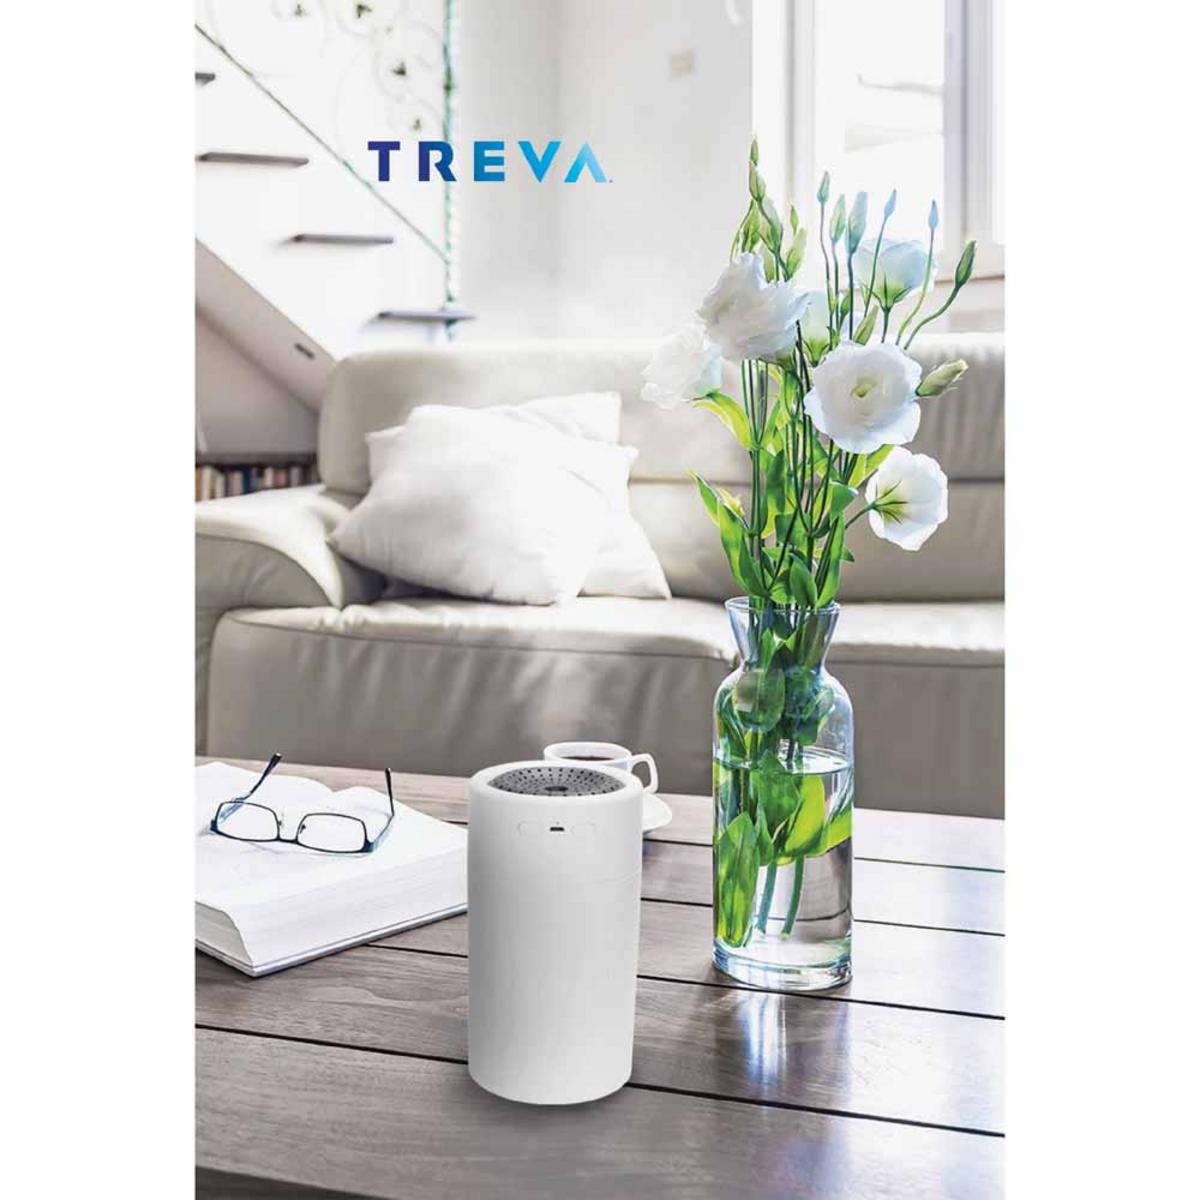 O2 Cool Treva Large Rechargeable 750 mL Humidifier - White